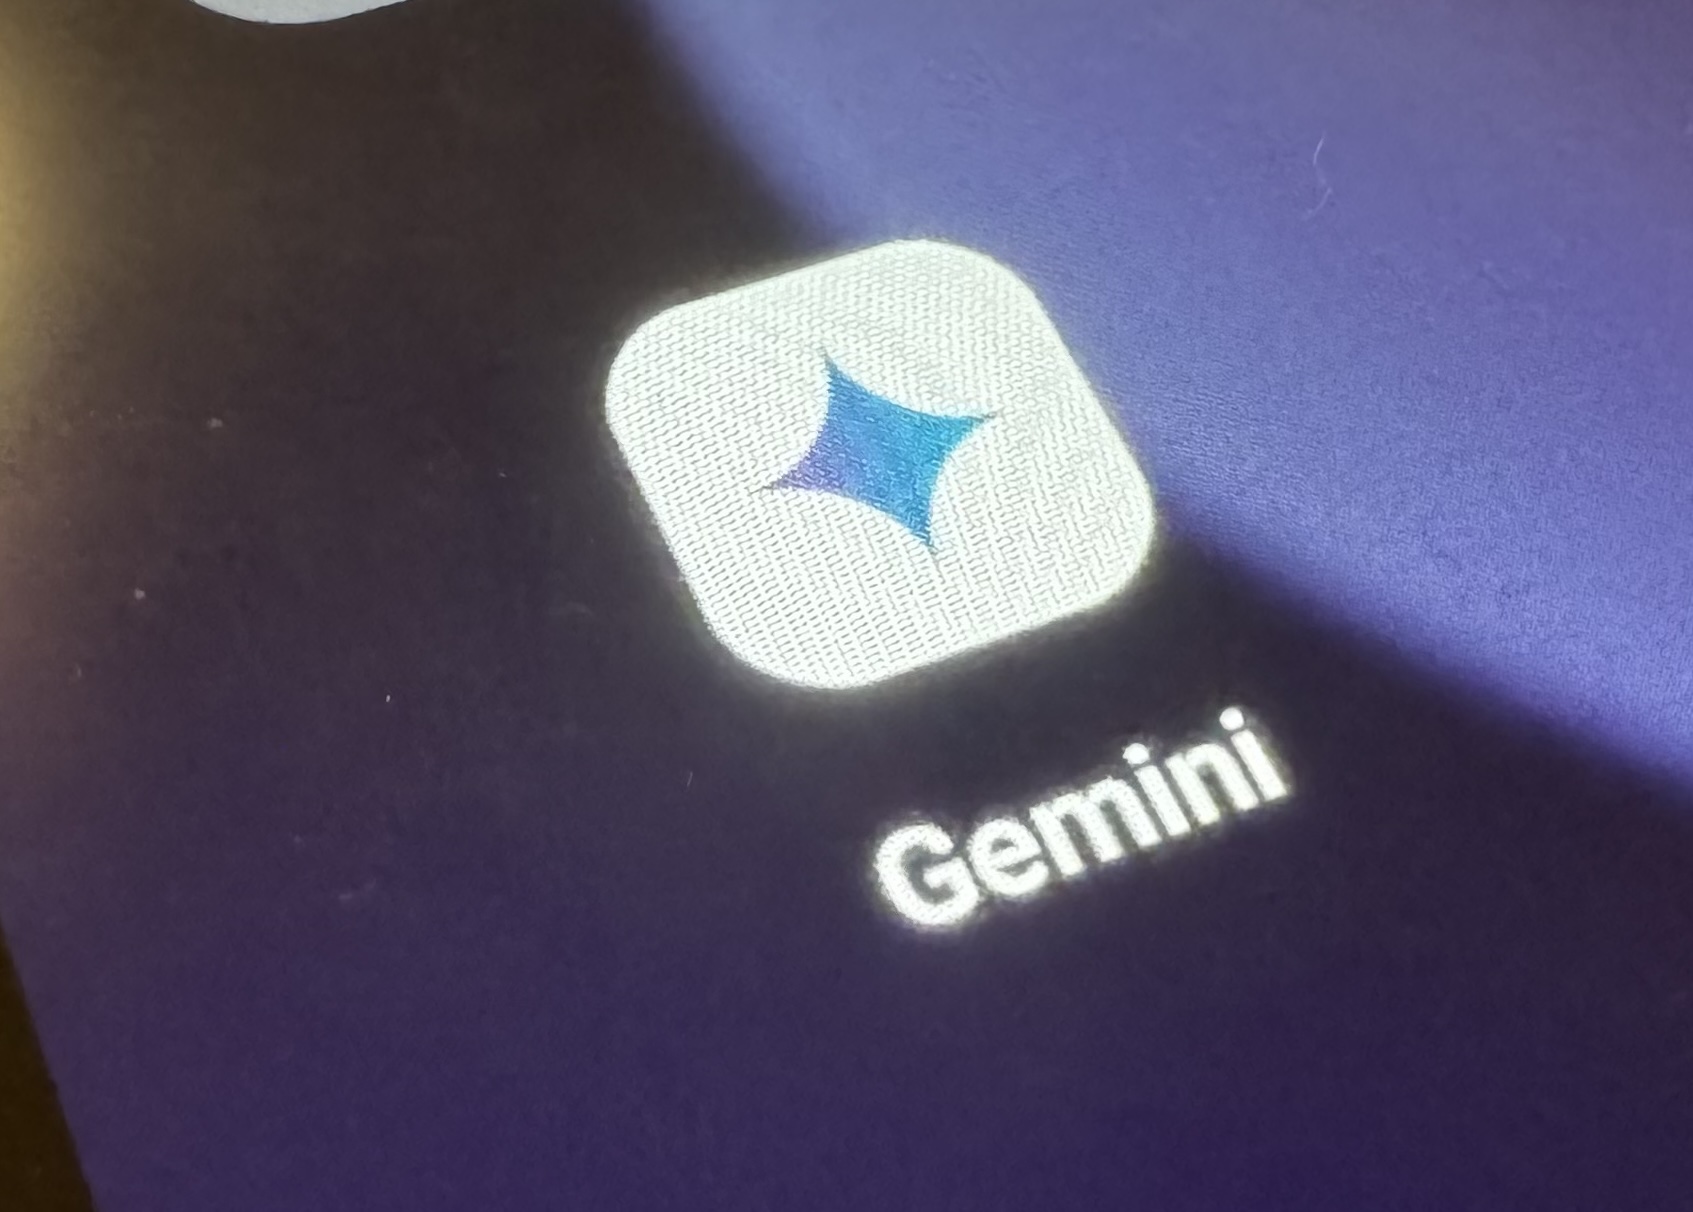 Google’s Gemini Updated With Enhanced Navigation Experience